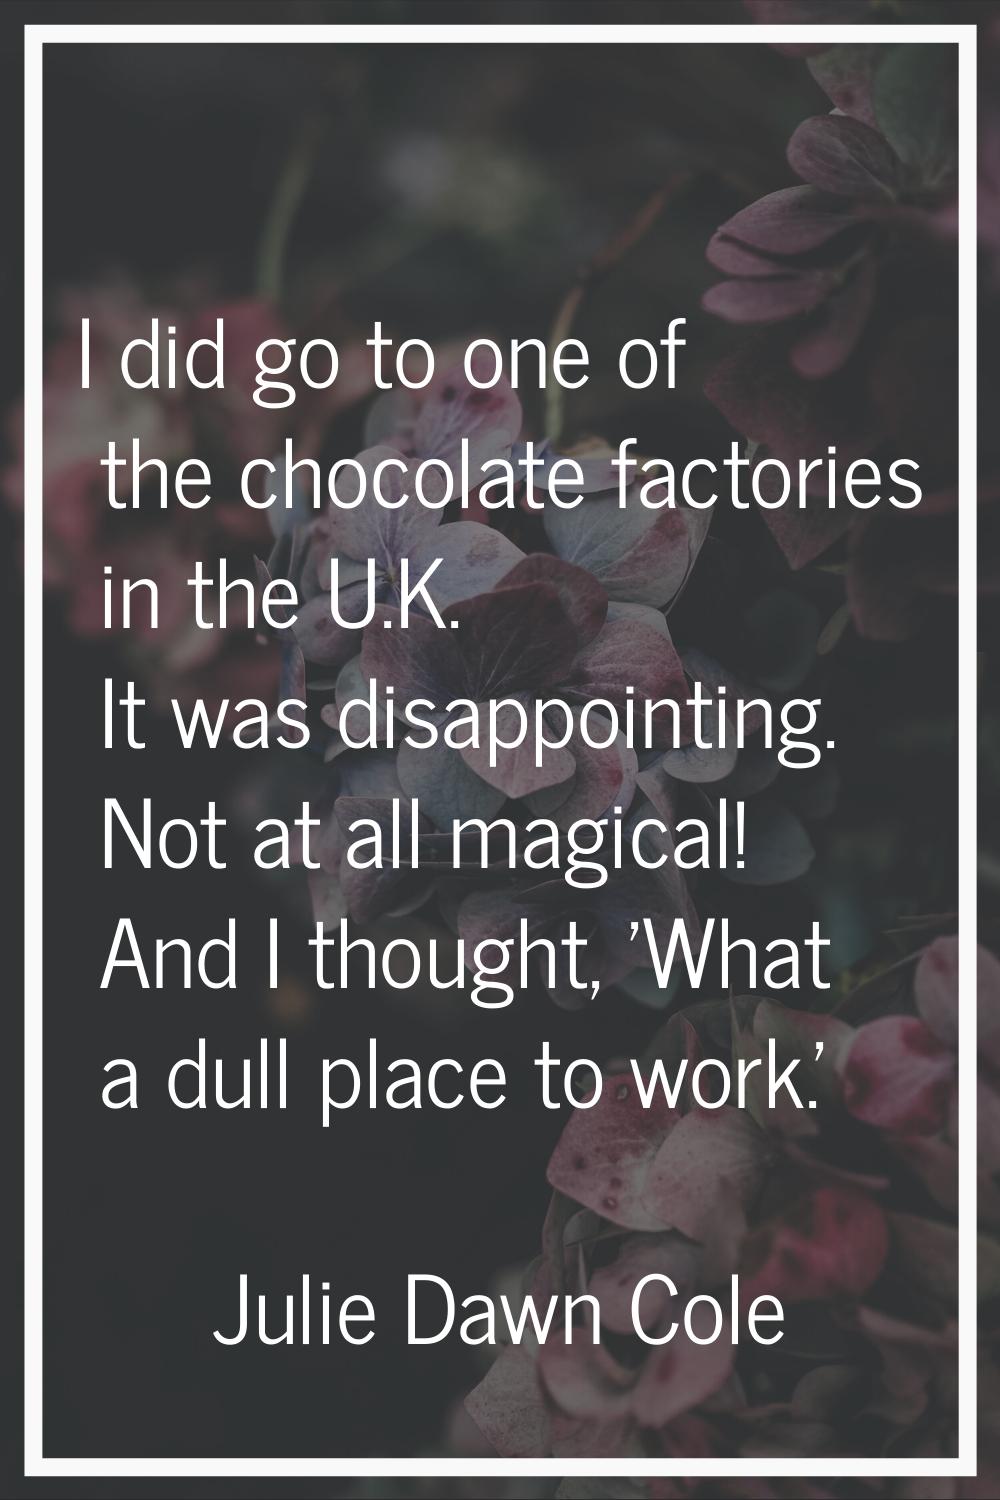 I did go to one of the chocolate factories in the U.K. It was disappointing. Not at all magical! An